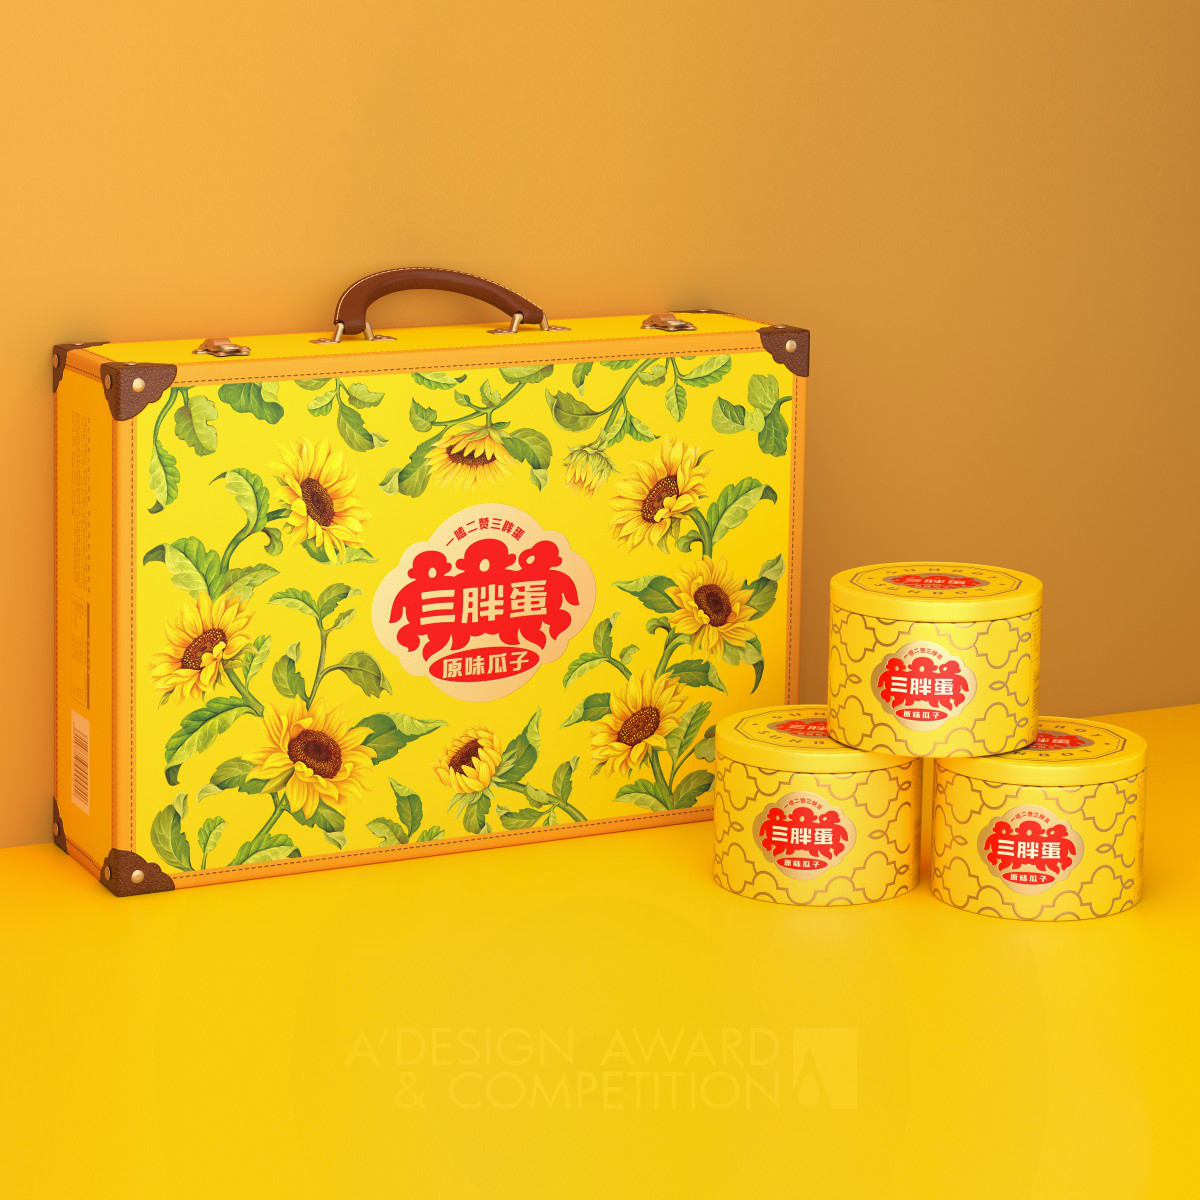 Sunboy Gift Box Sunflower Seeds by TIGER PAN